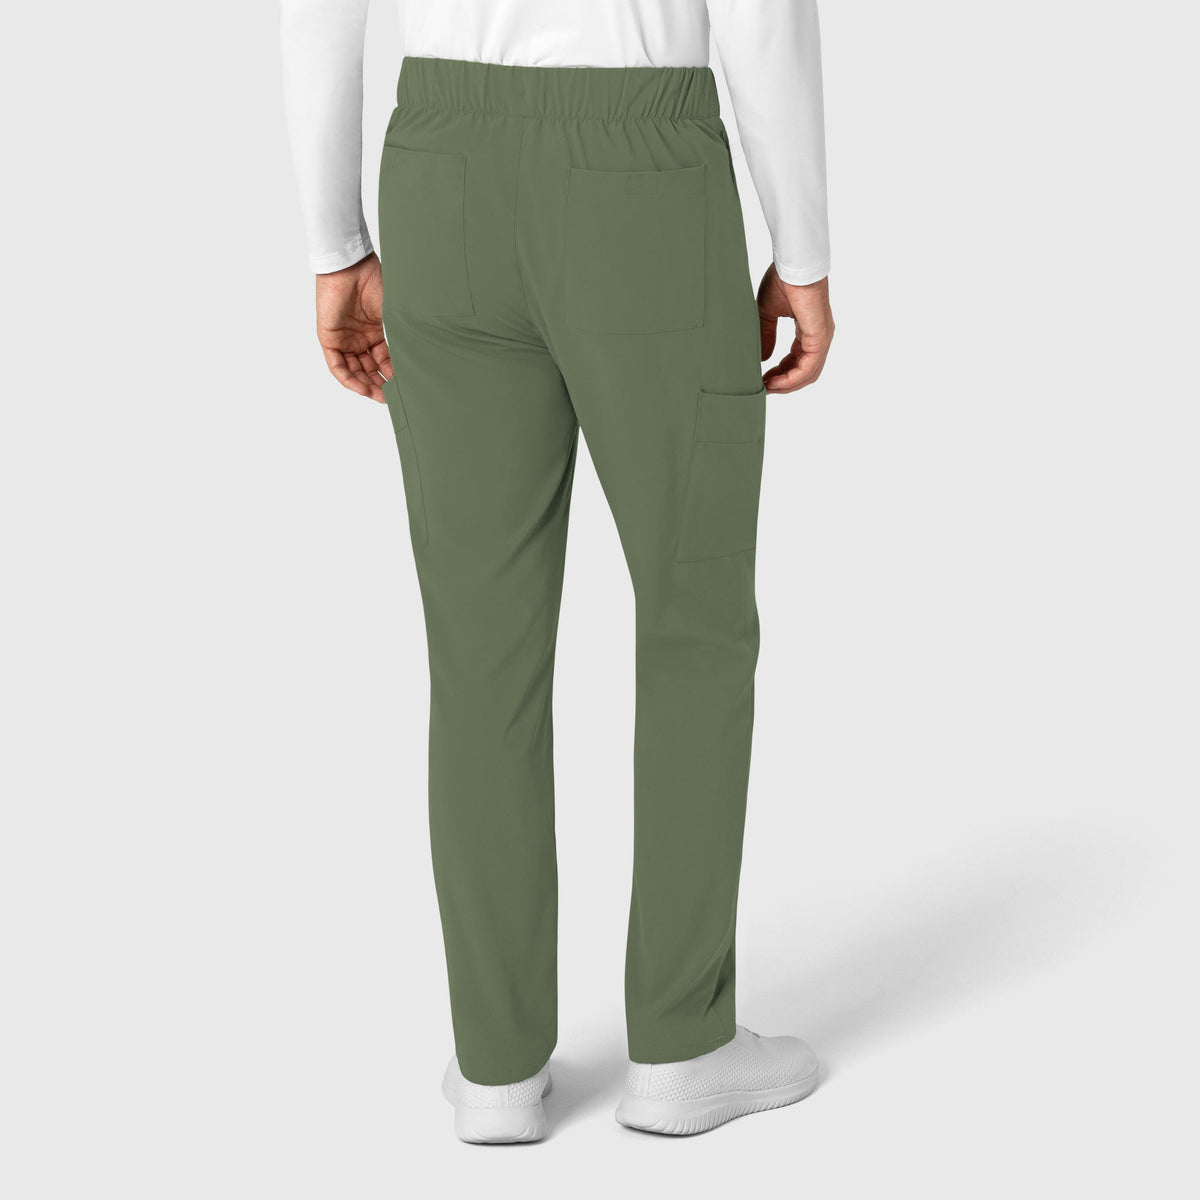 RENEW Men's Tapered Scrub Pant Olive back view